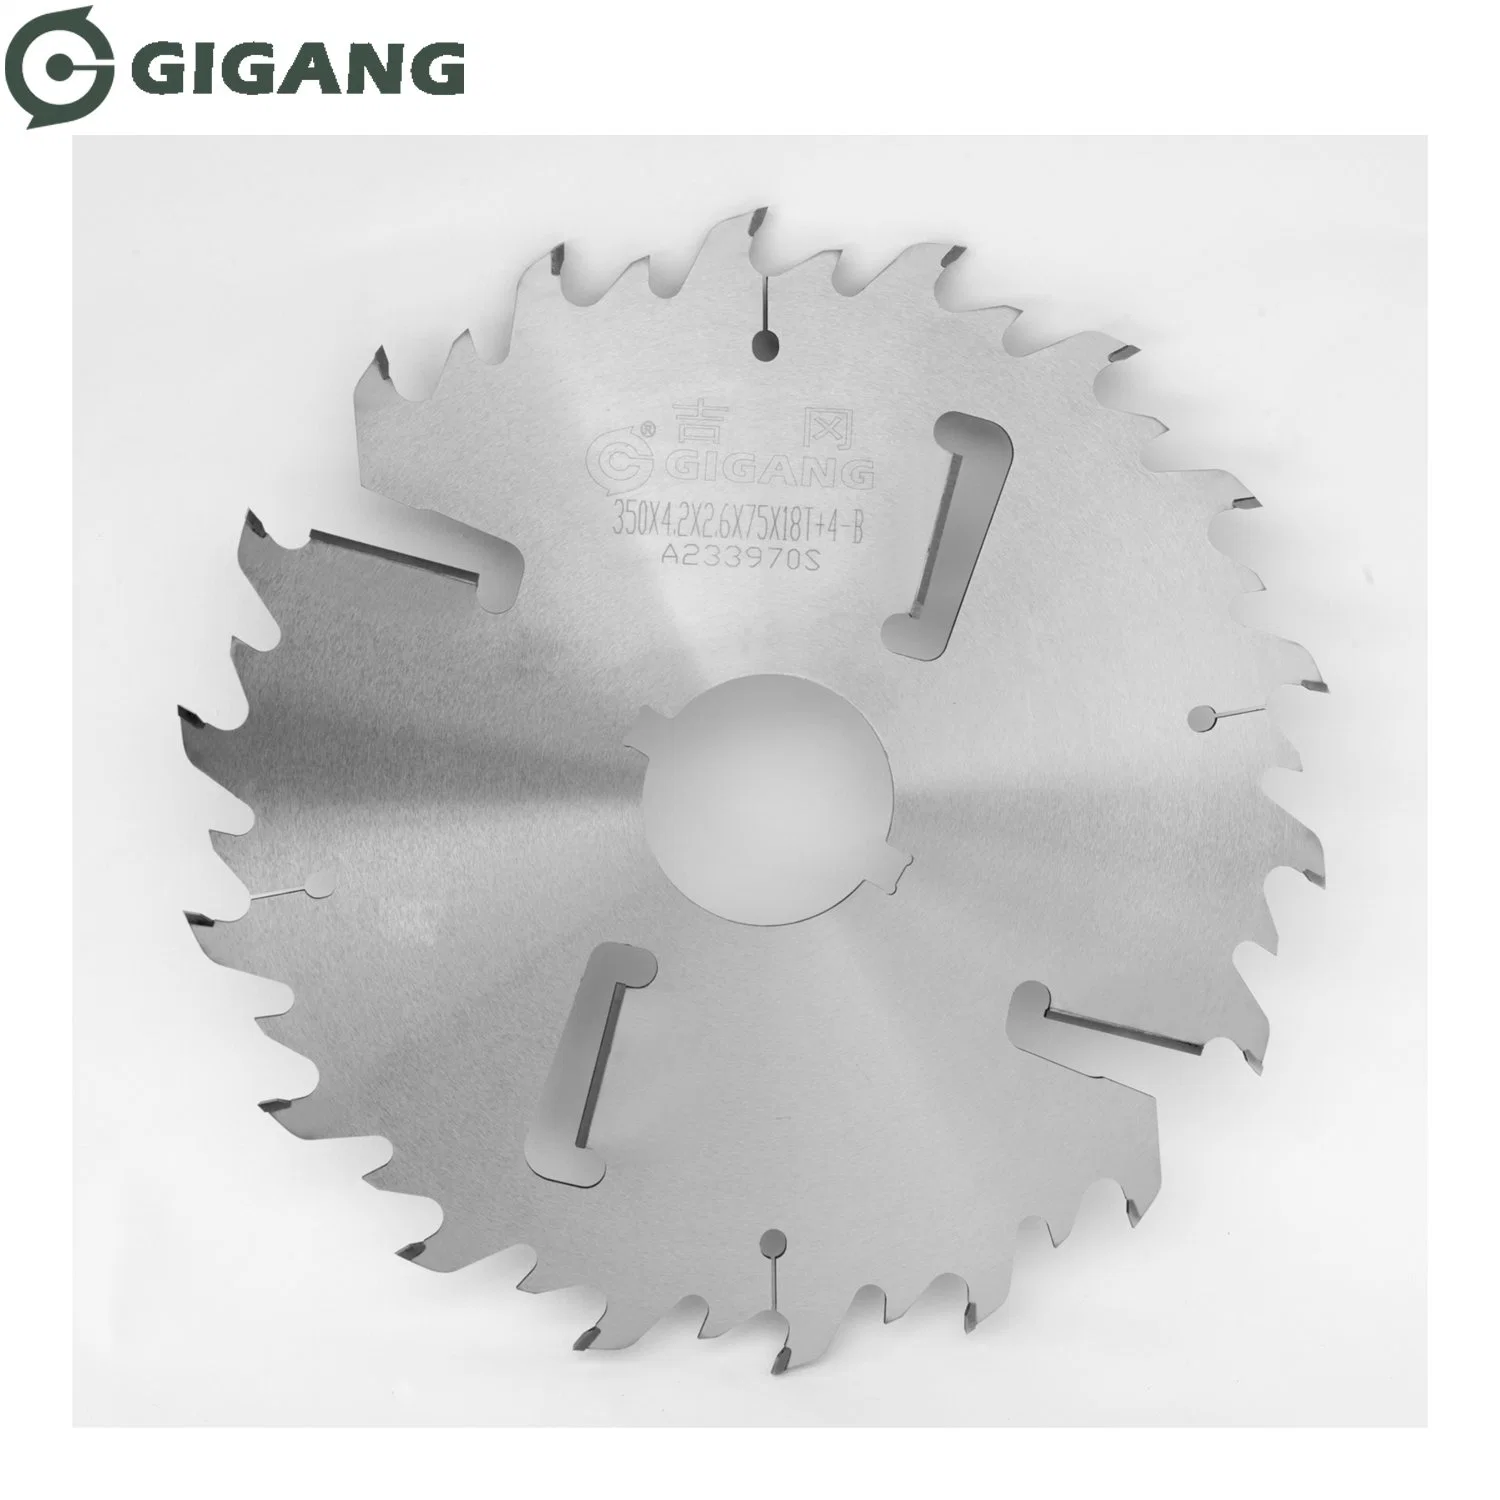 Alloy Specific Multi Ripping Tct Circular Saw Blade with Rakers